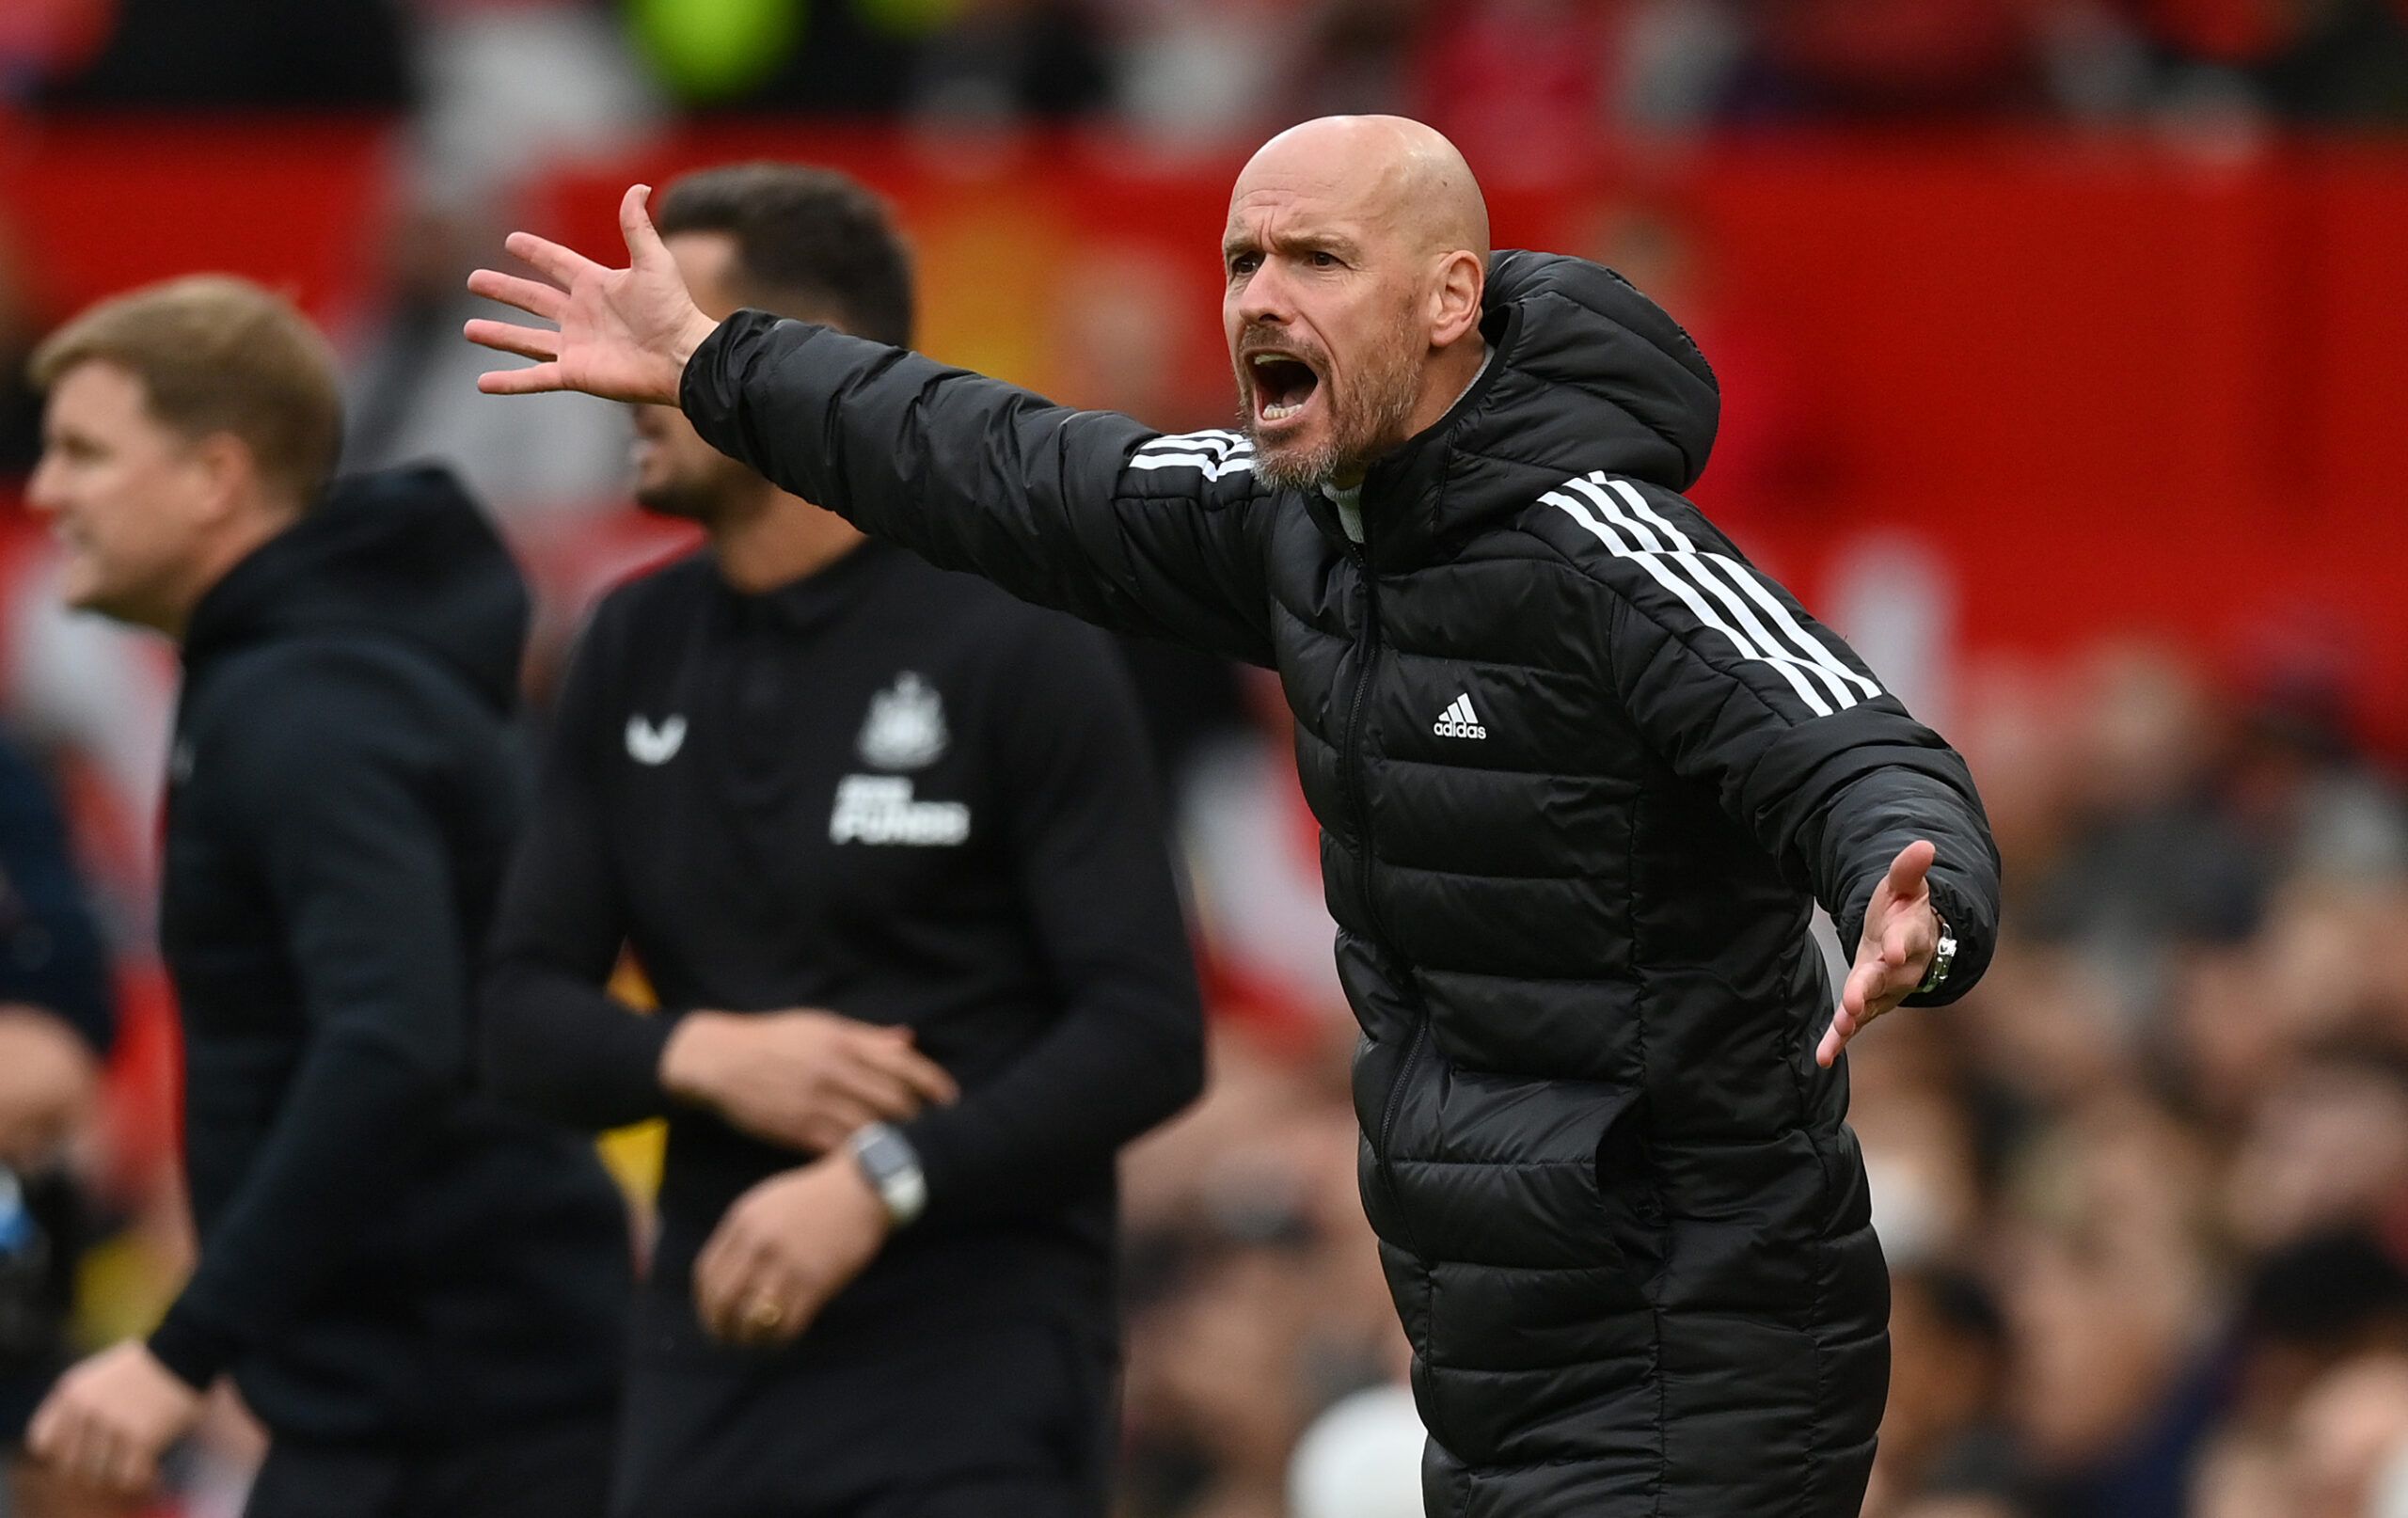 Erik ten Hag was frustrated after 0-0 draw v Newcastle